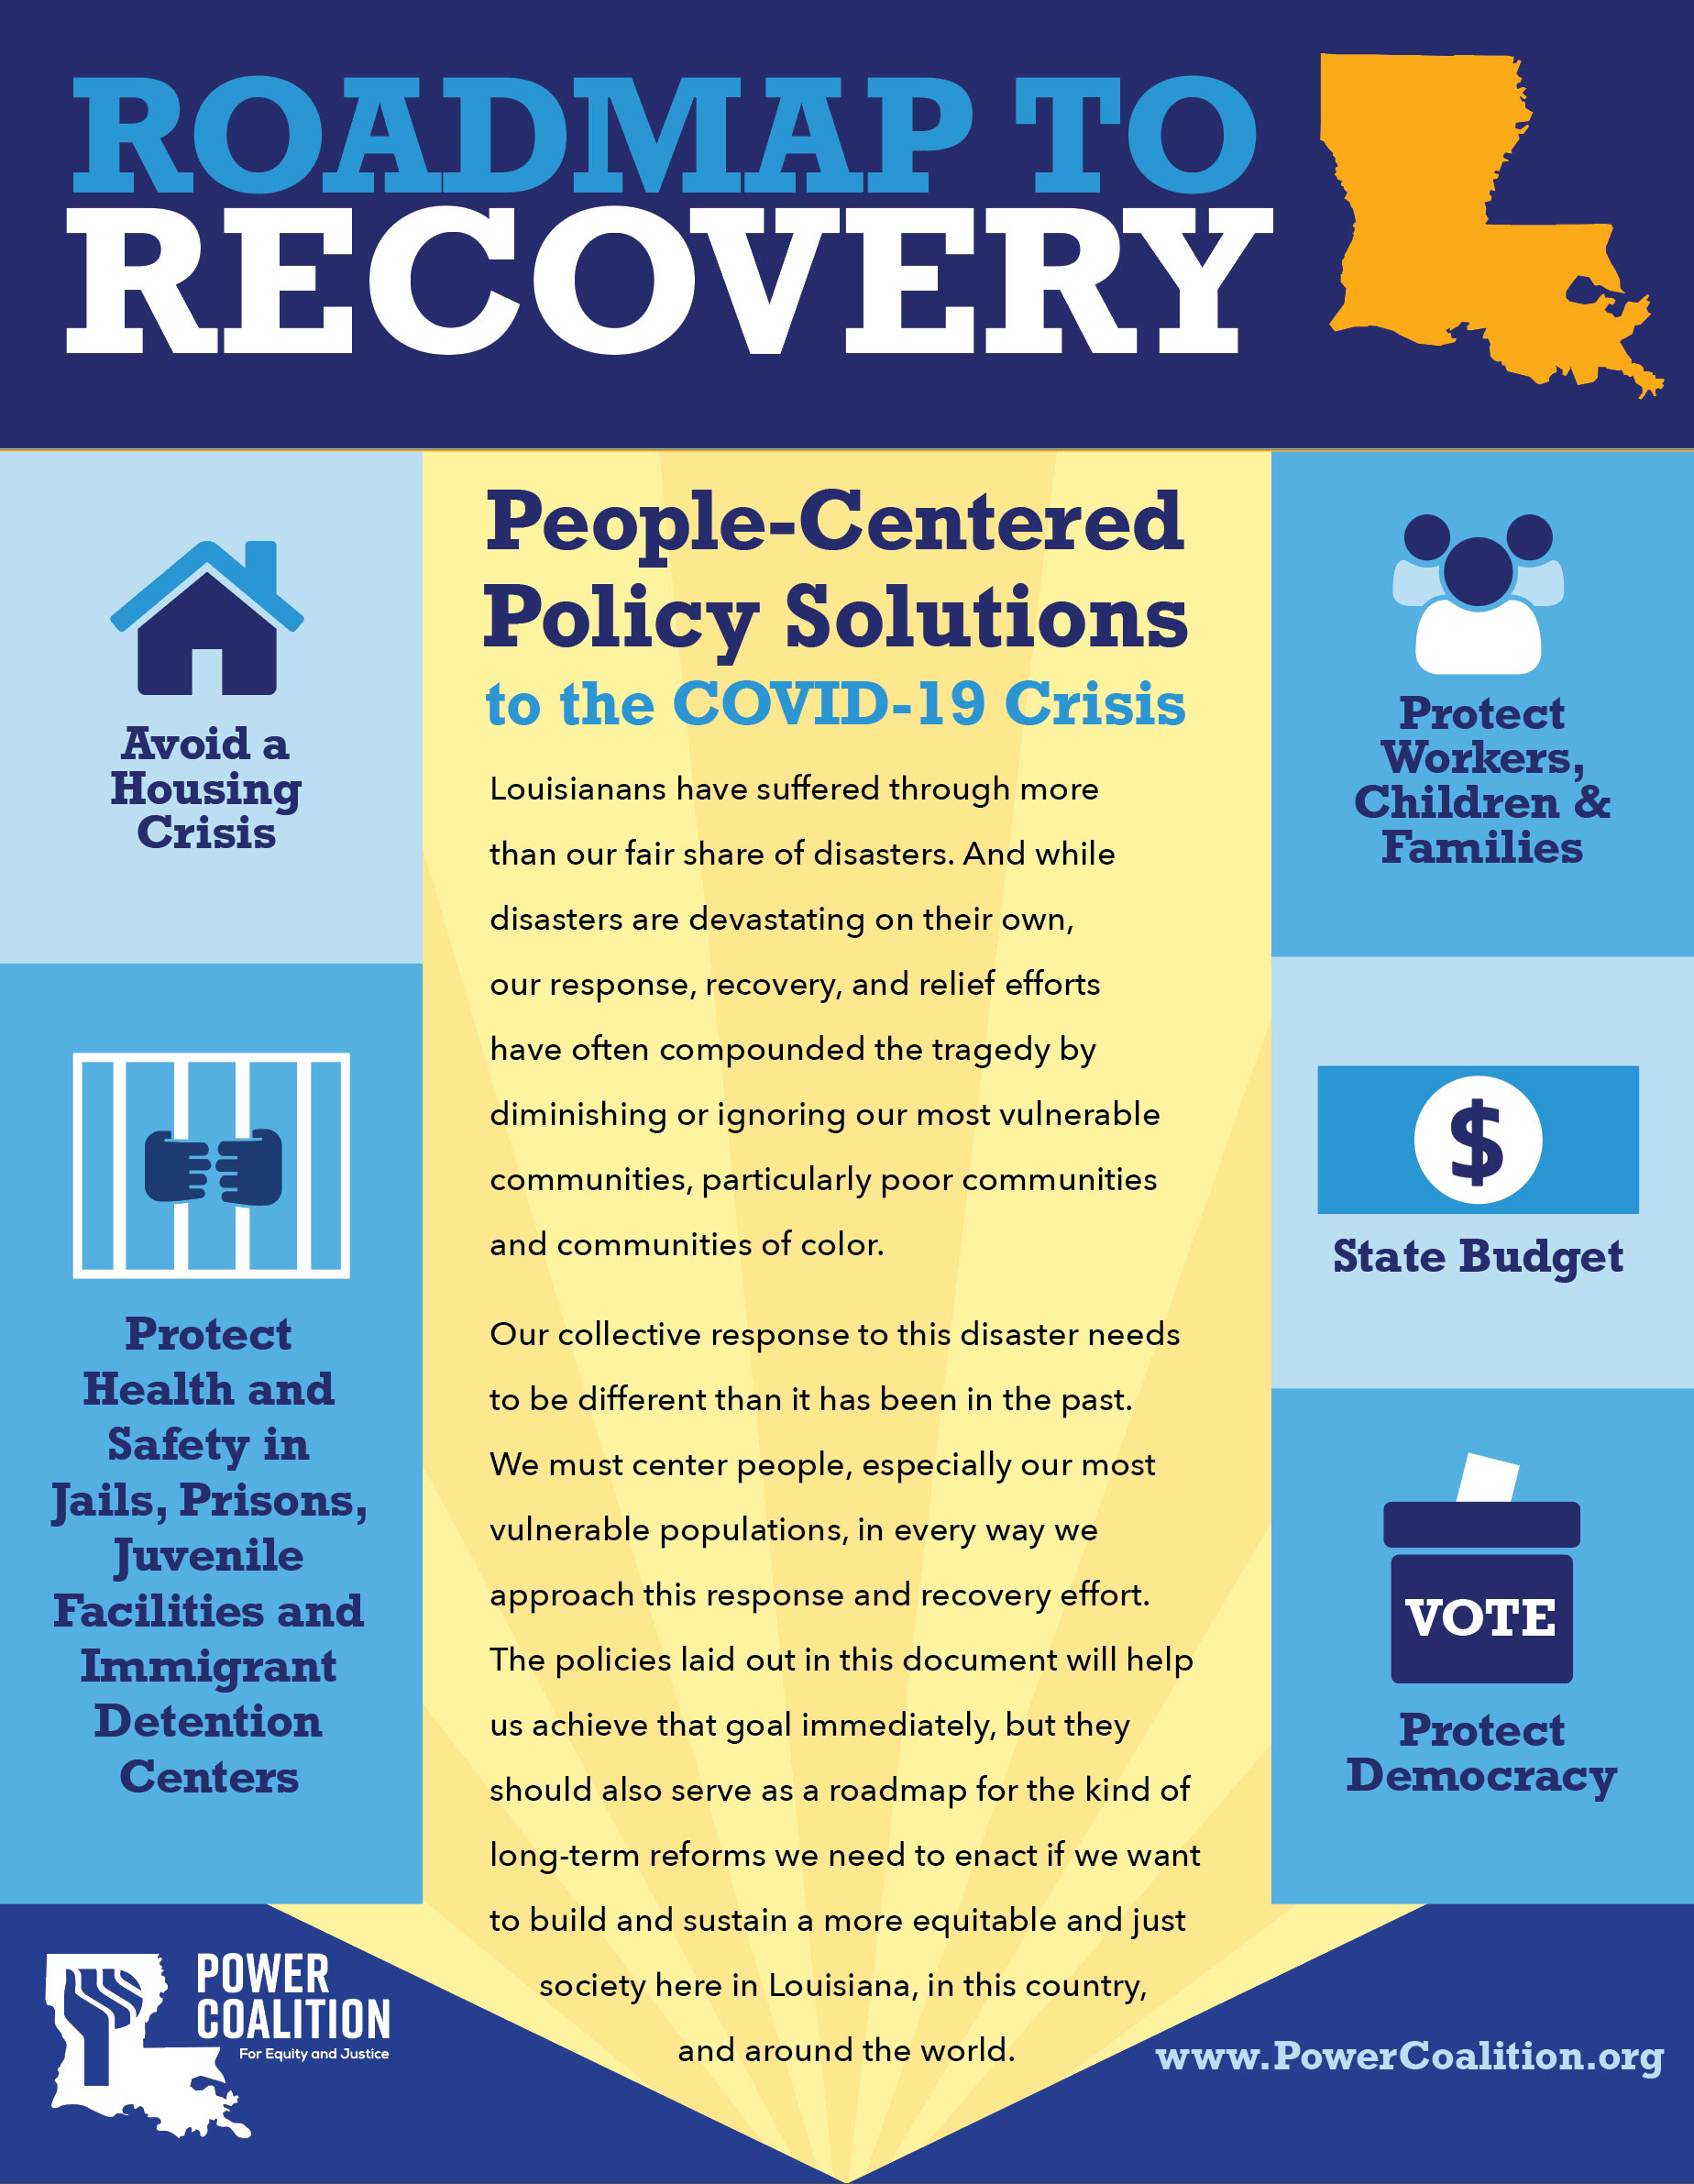 Roadmap to Recovery: People-Centered Policy Solutions to the COVID-19 Crisis